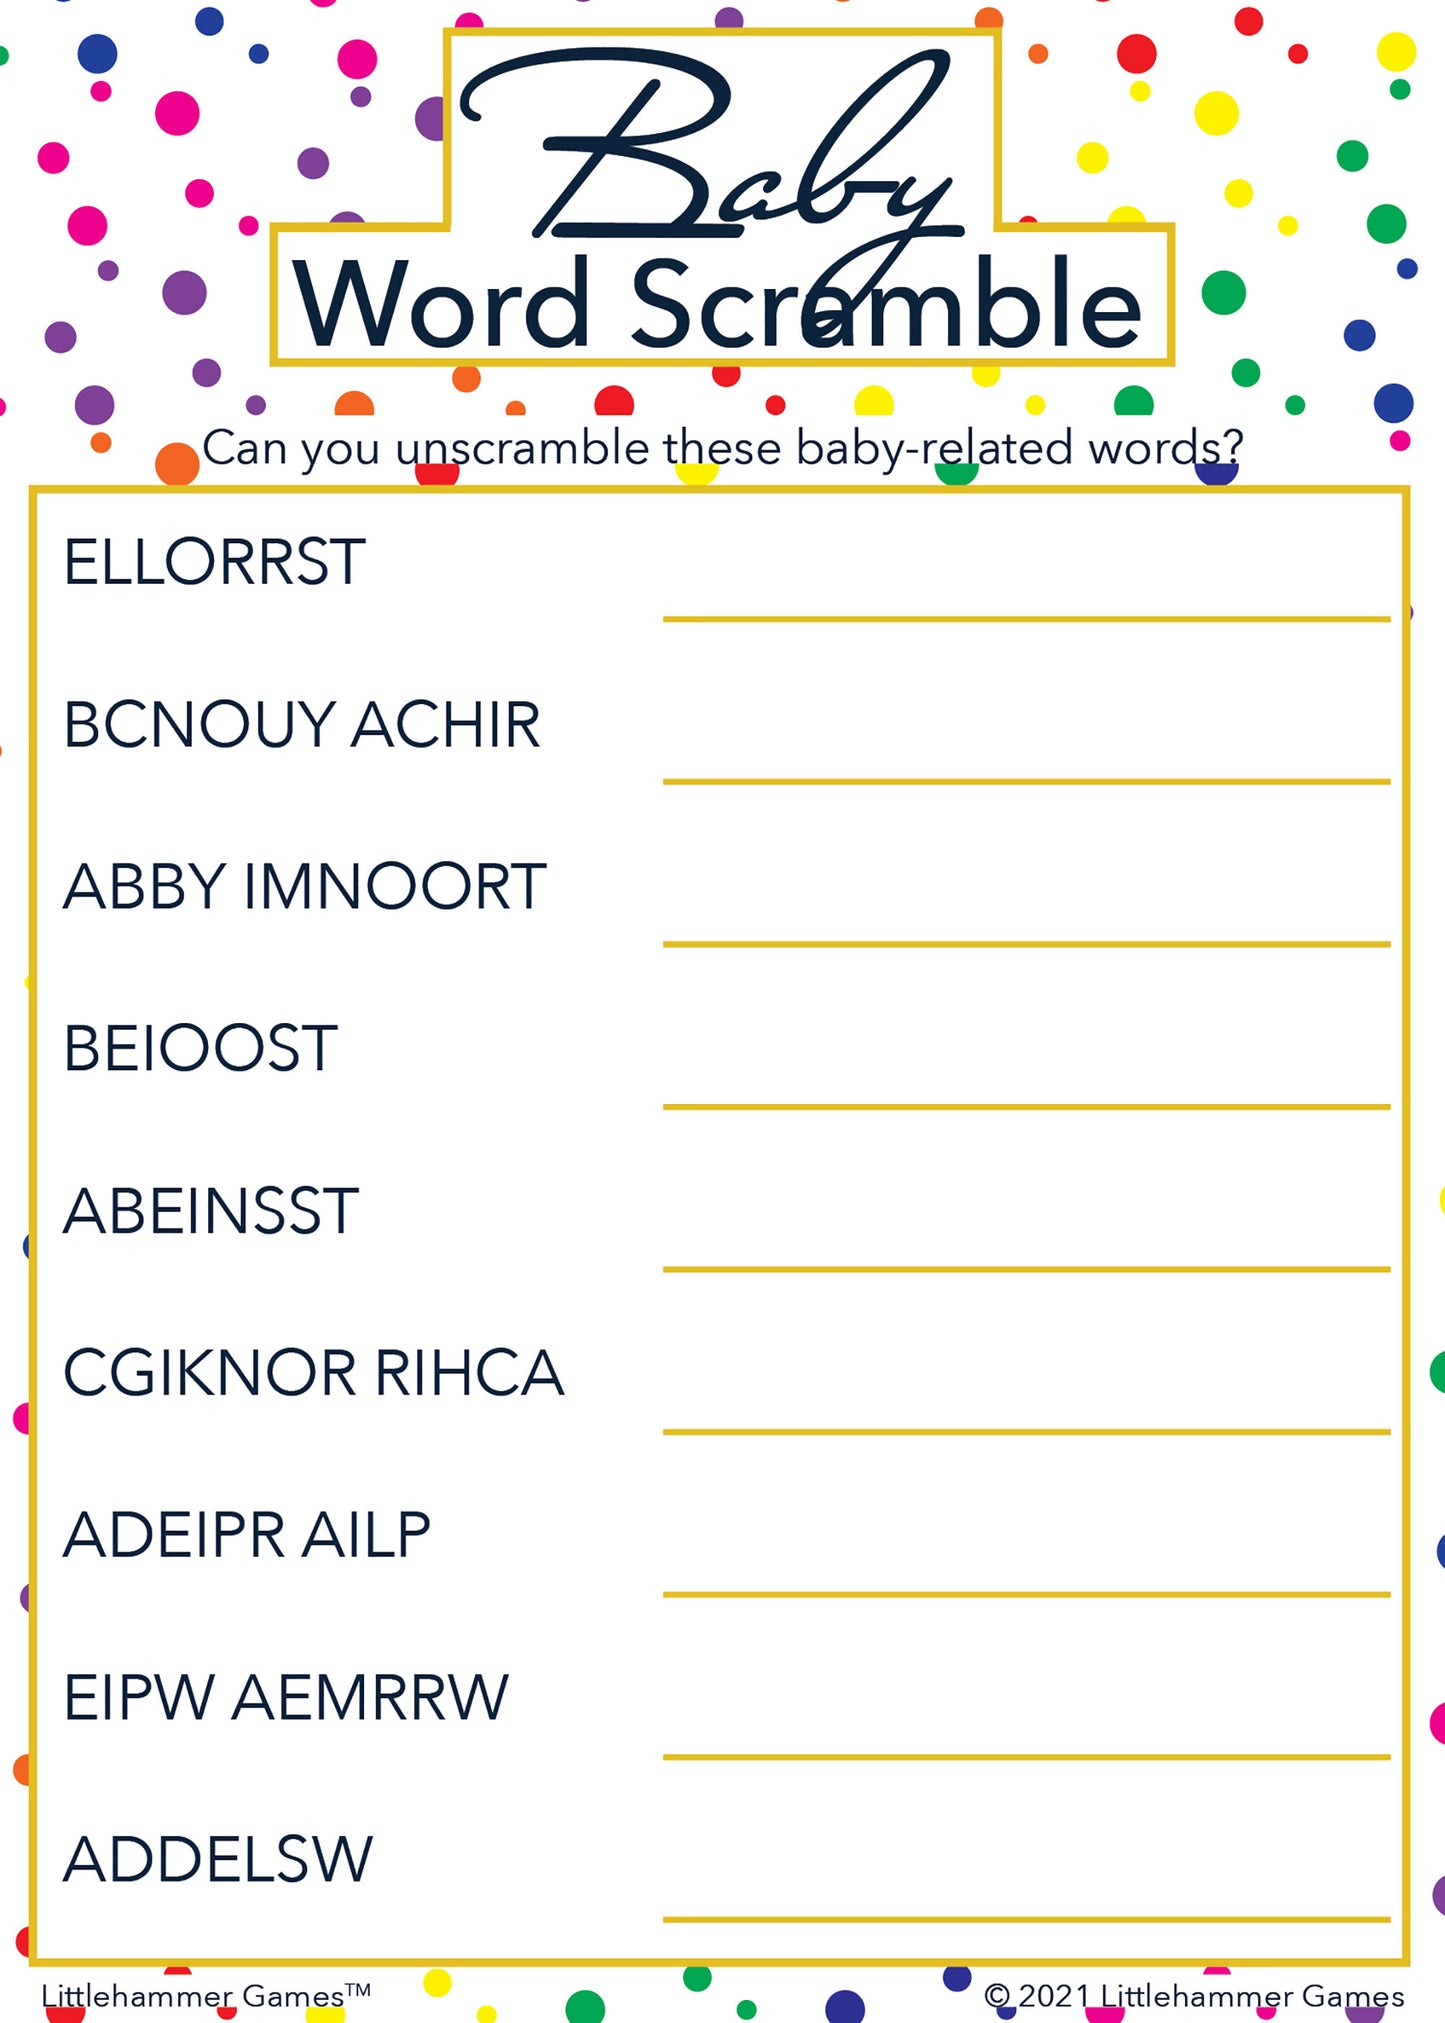 Baby Word Scramble game card with a rainbow polka dot background